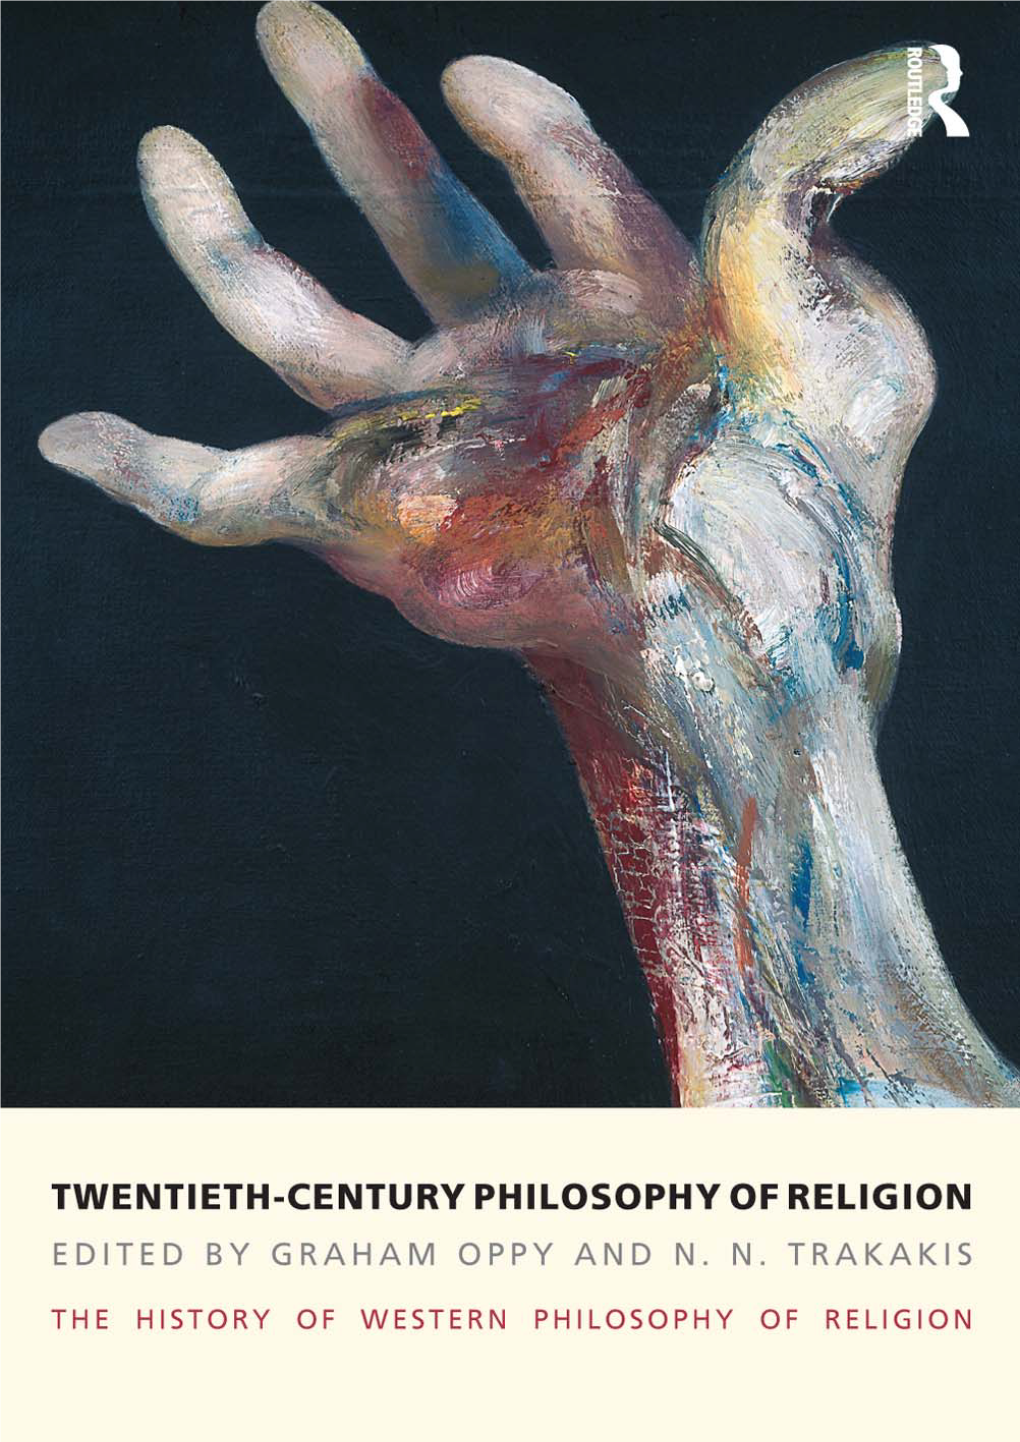 The History of Western Philosophy of Religion, Volume 5